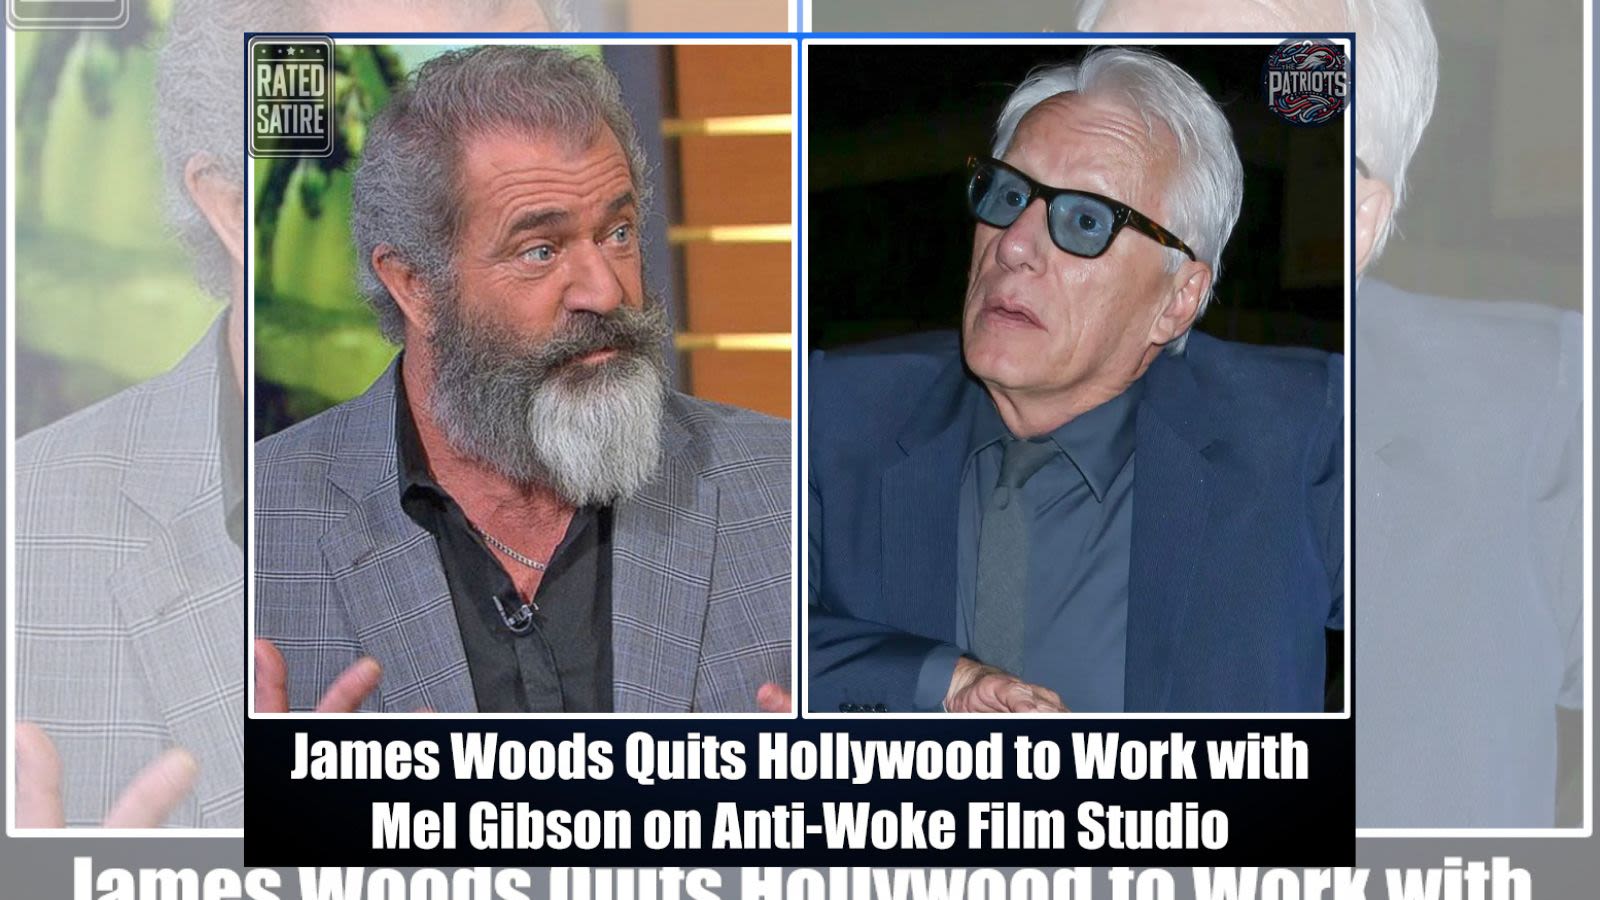 Fact Check: James Woods Supposedly Left Hollywood to Join Mel Gibson's 'Anti-Woke' Studio. Here Are the Facts